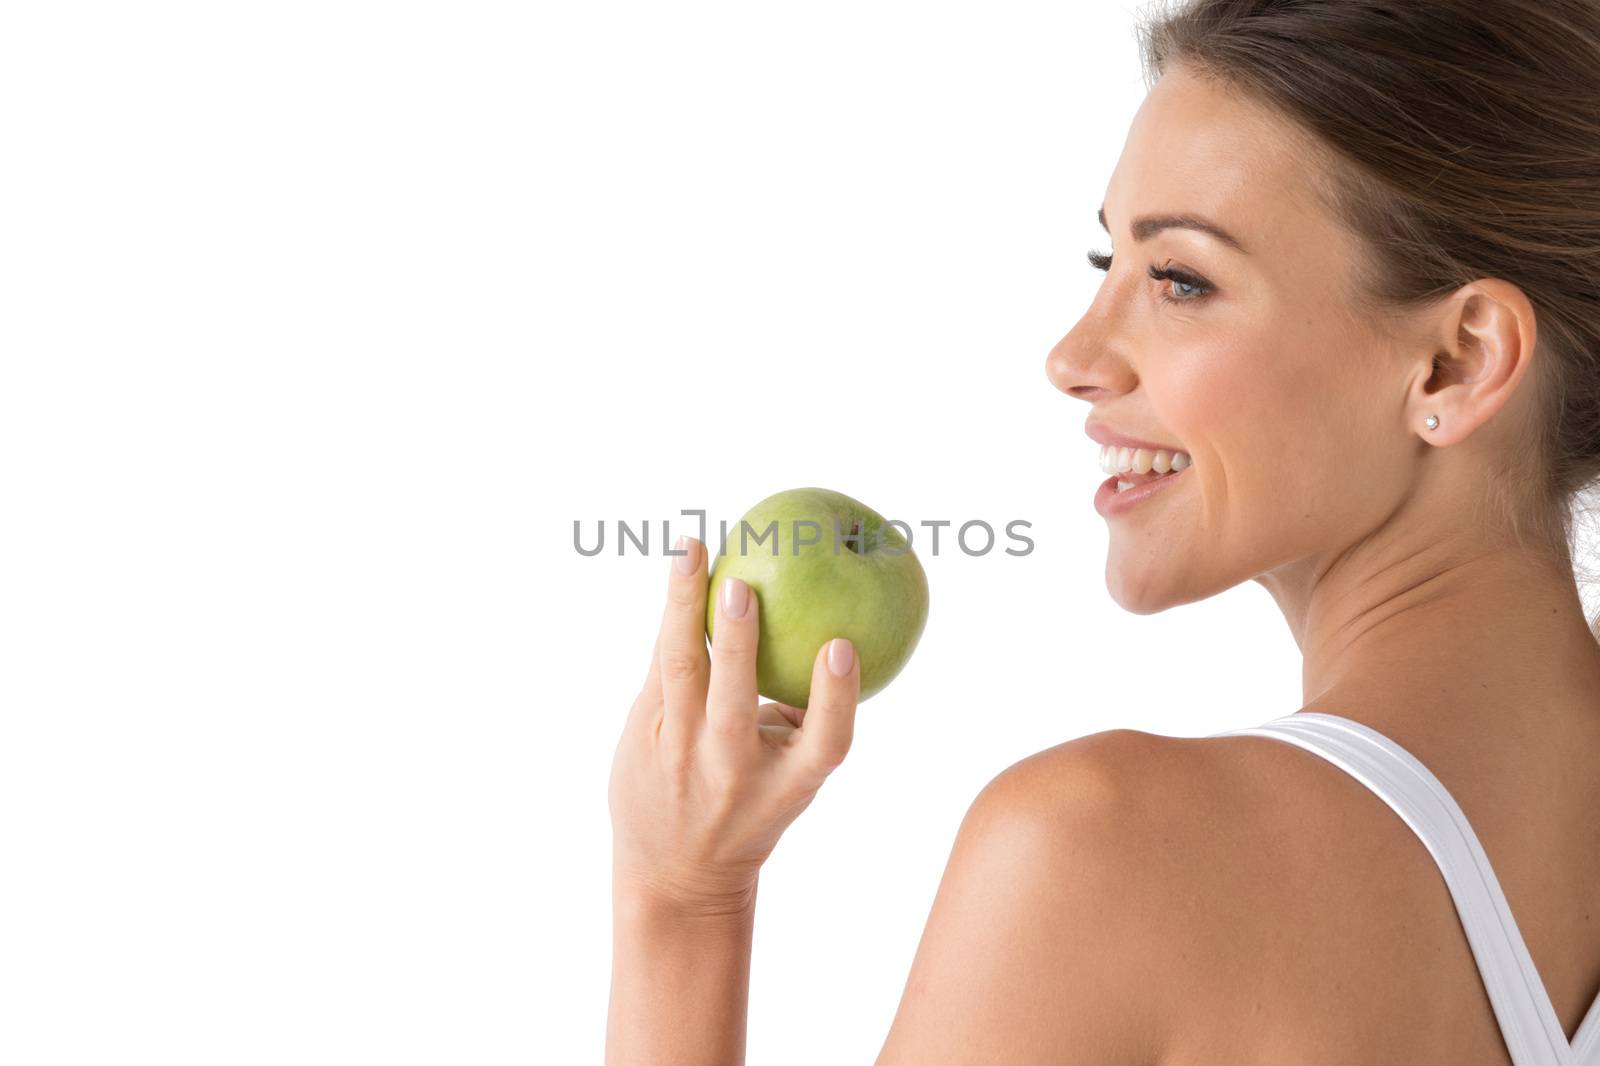 Beautiful smile, white strong teeth. Head and shoulders of young woman with snow-white toothy smile holding green apple, teethcare. Studio isolated on white background